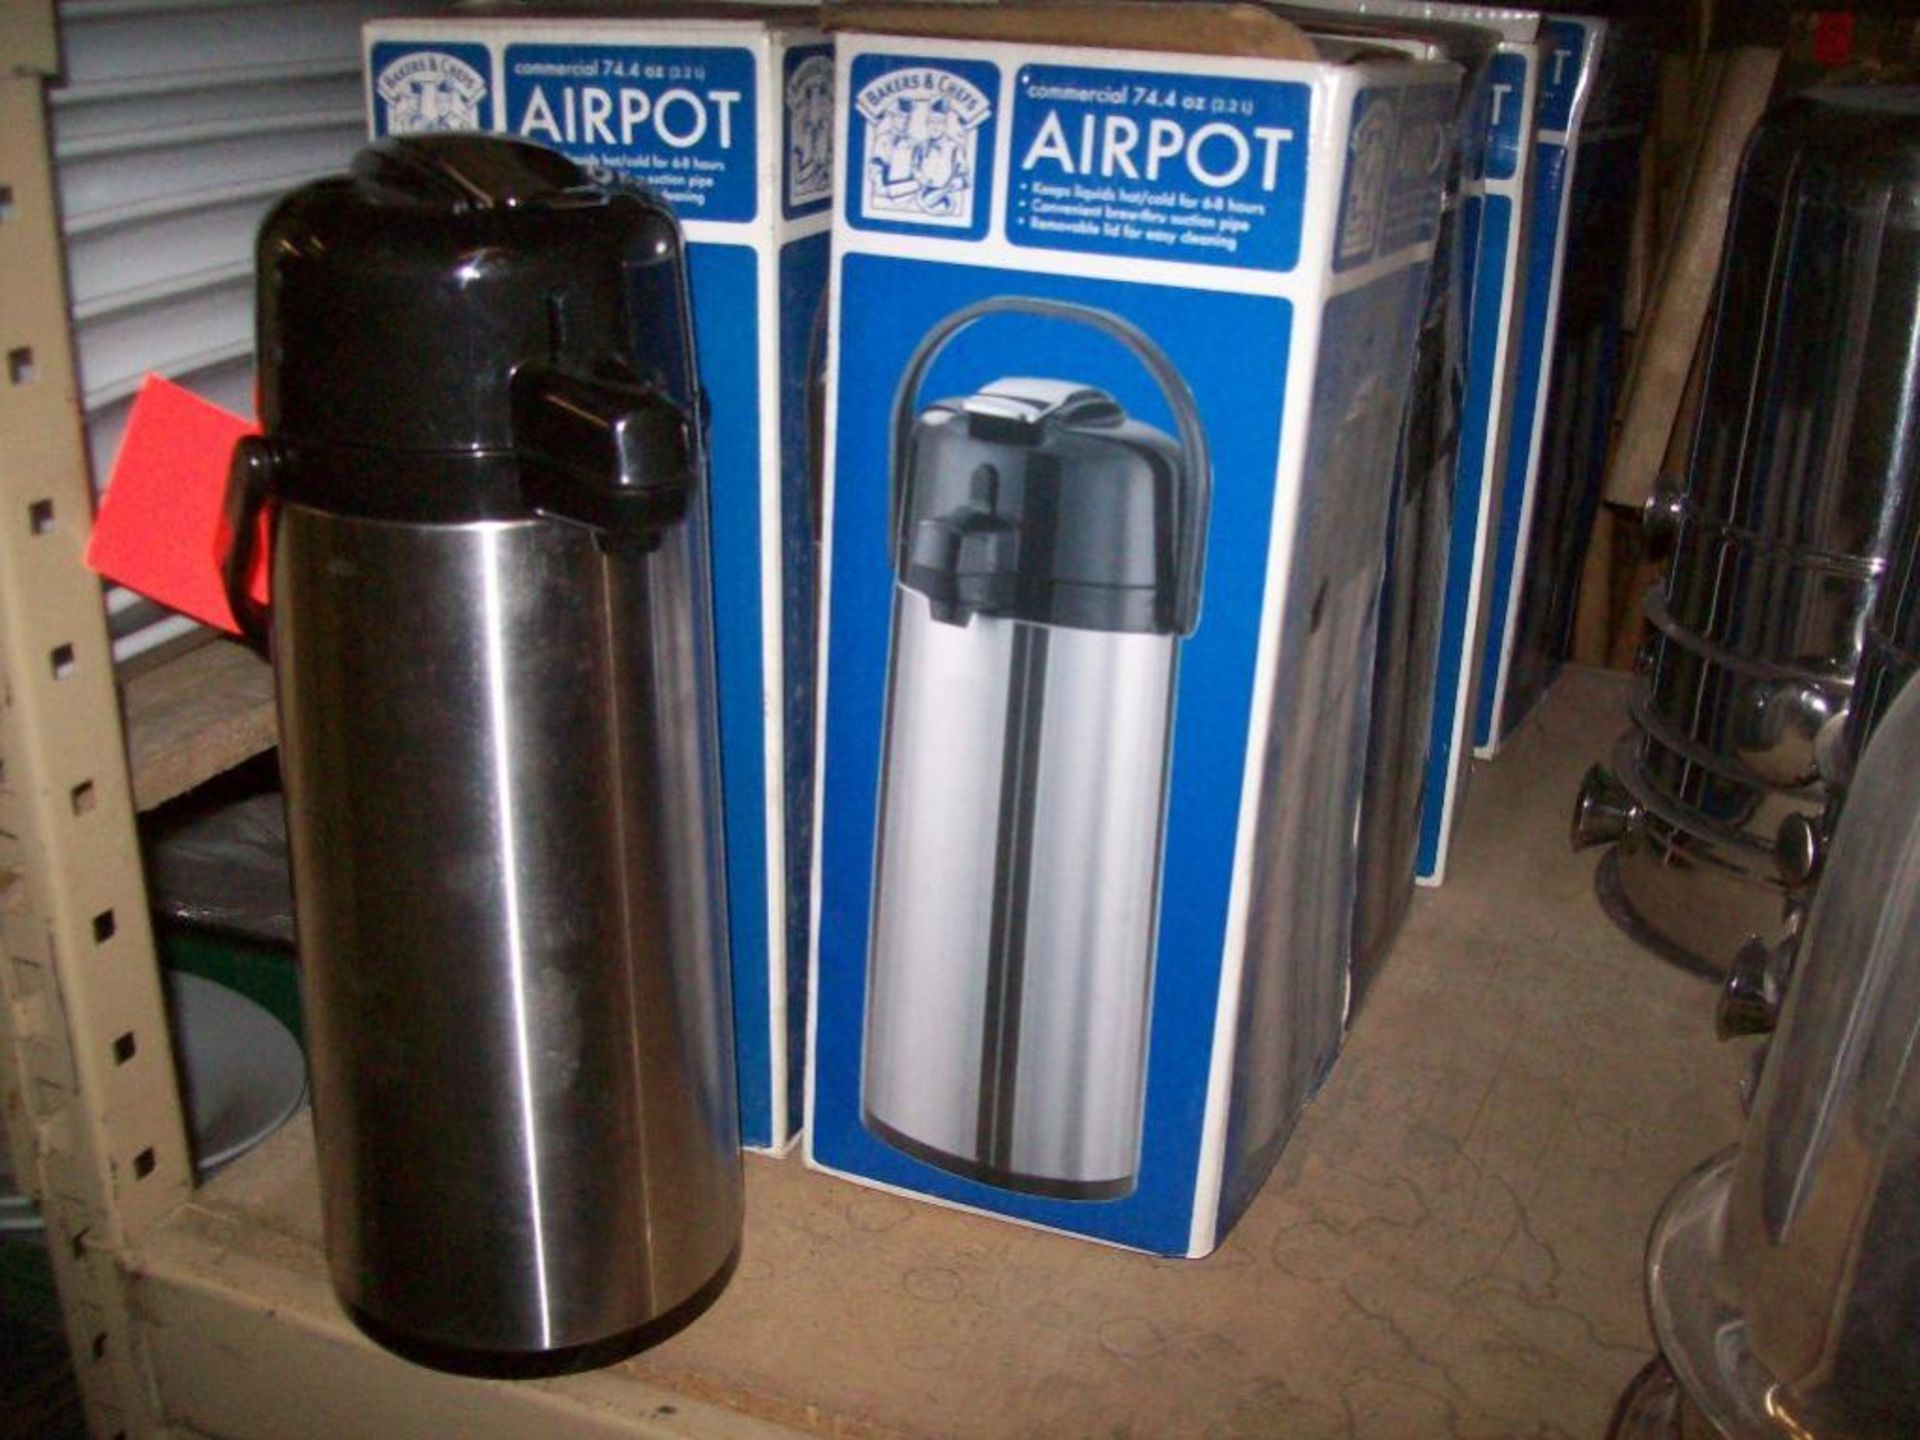 Bakers & Chefs 74.4 oz. commercial airpots-appear unused